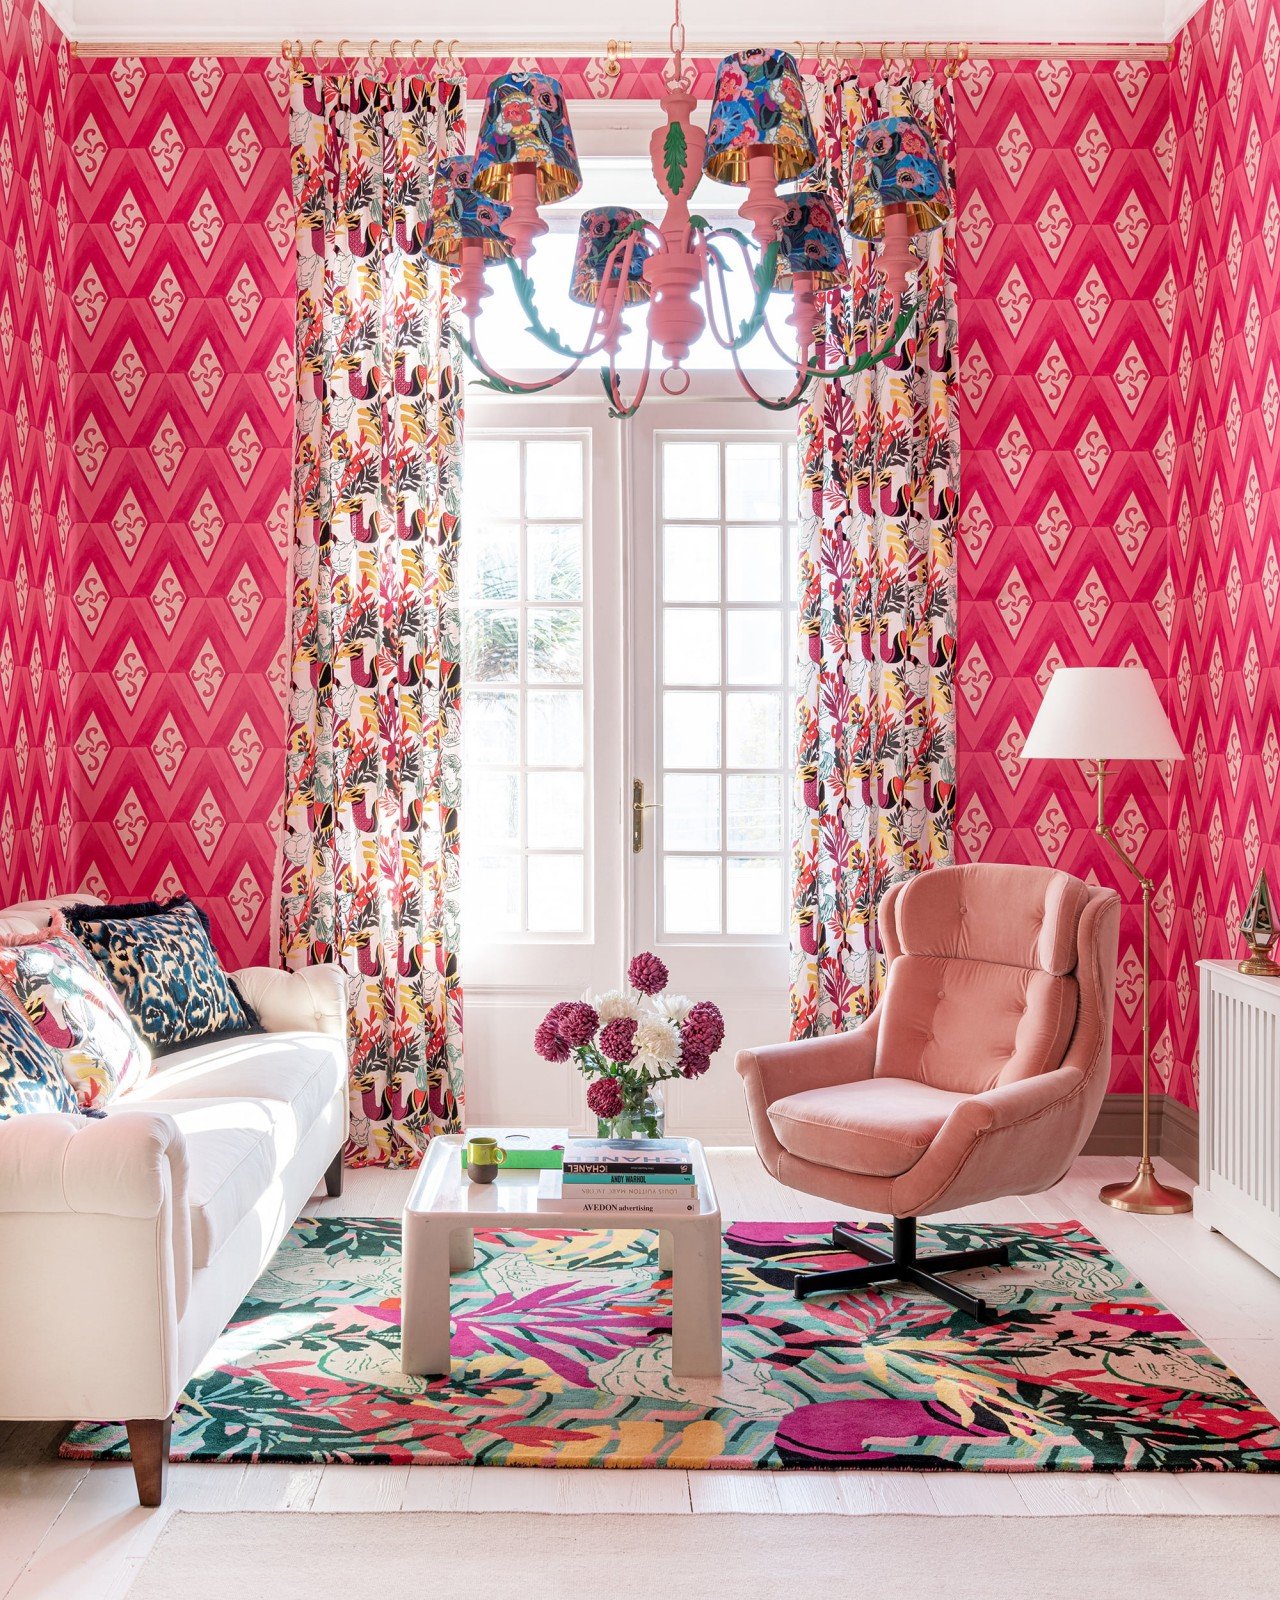 GIRANDOLA is my dream pink wallpaper. Do I care that is comes in four more colors? No, I do not. #pinkwallpaper #wallpaper #wallpaperart #ladolcevita